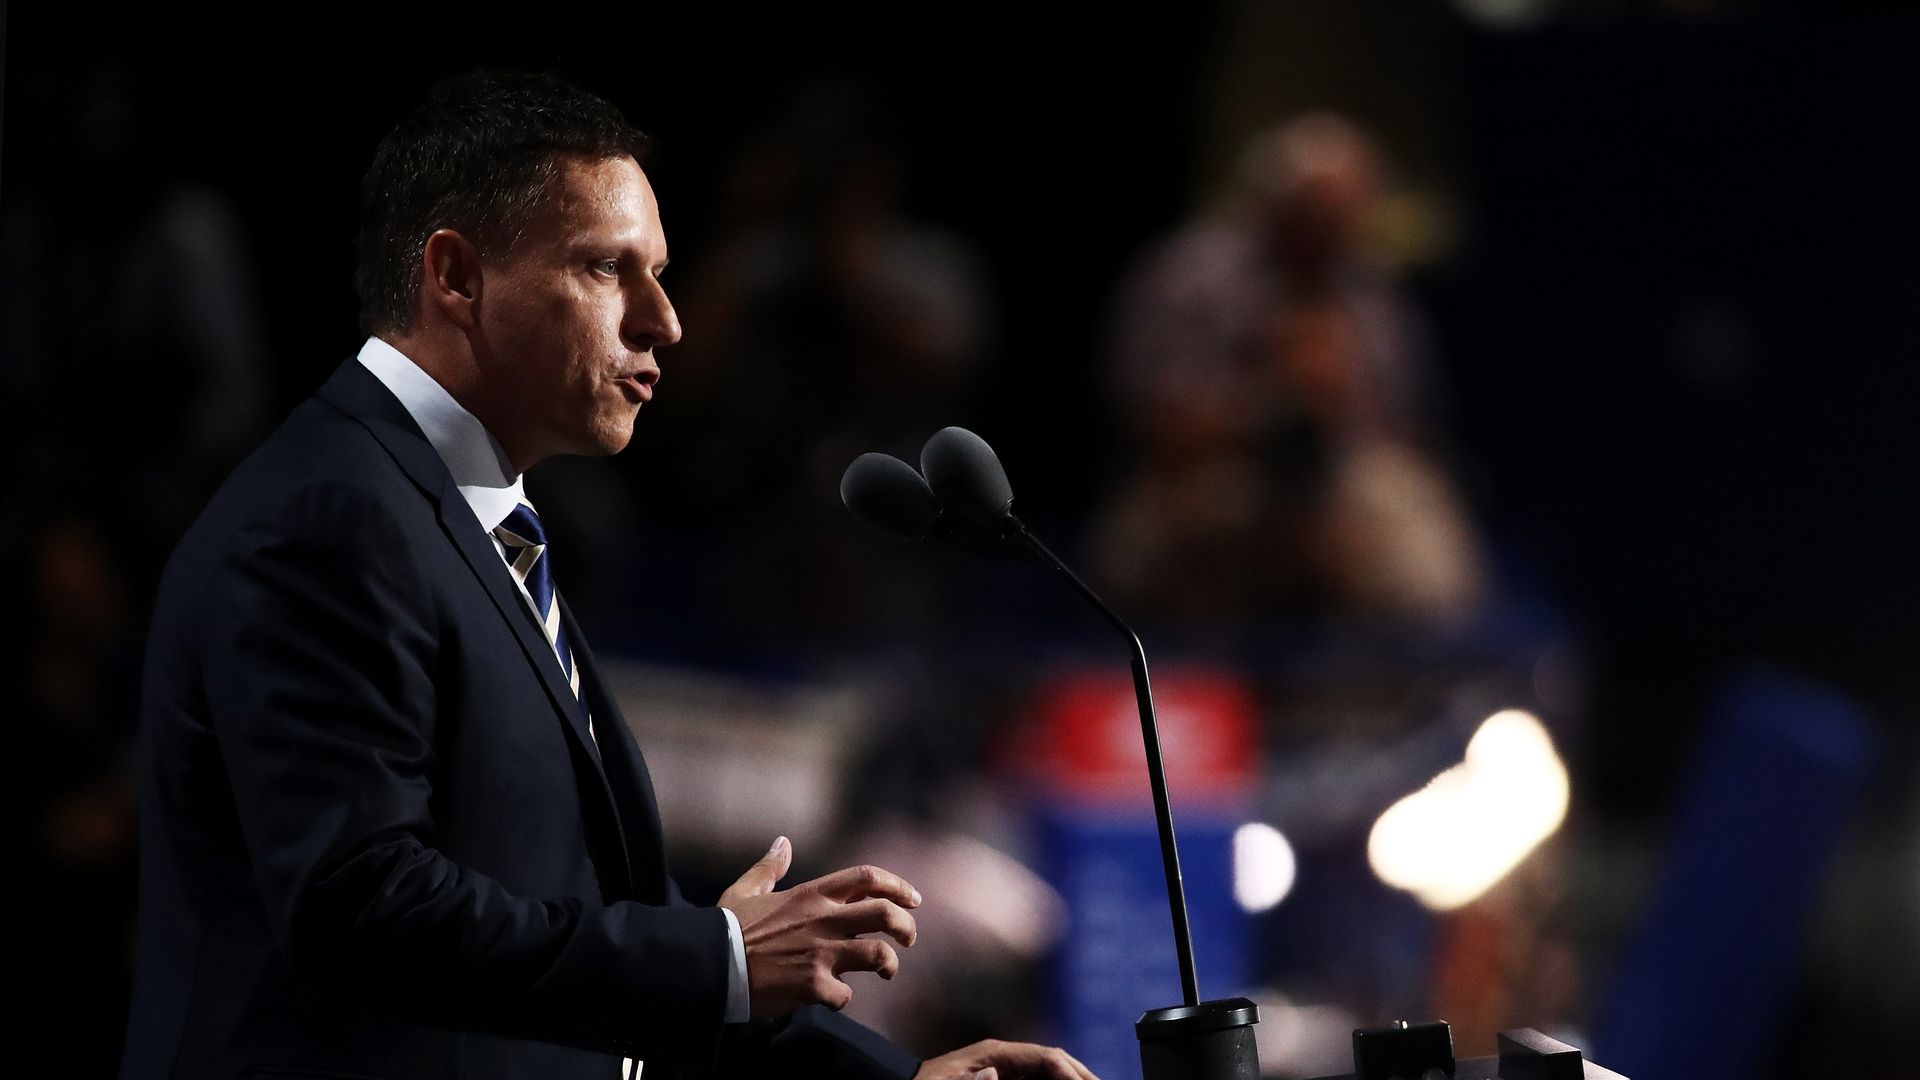 Peter Thiel speaking at the National Republican Convention